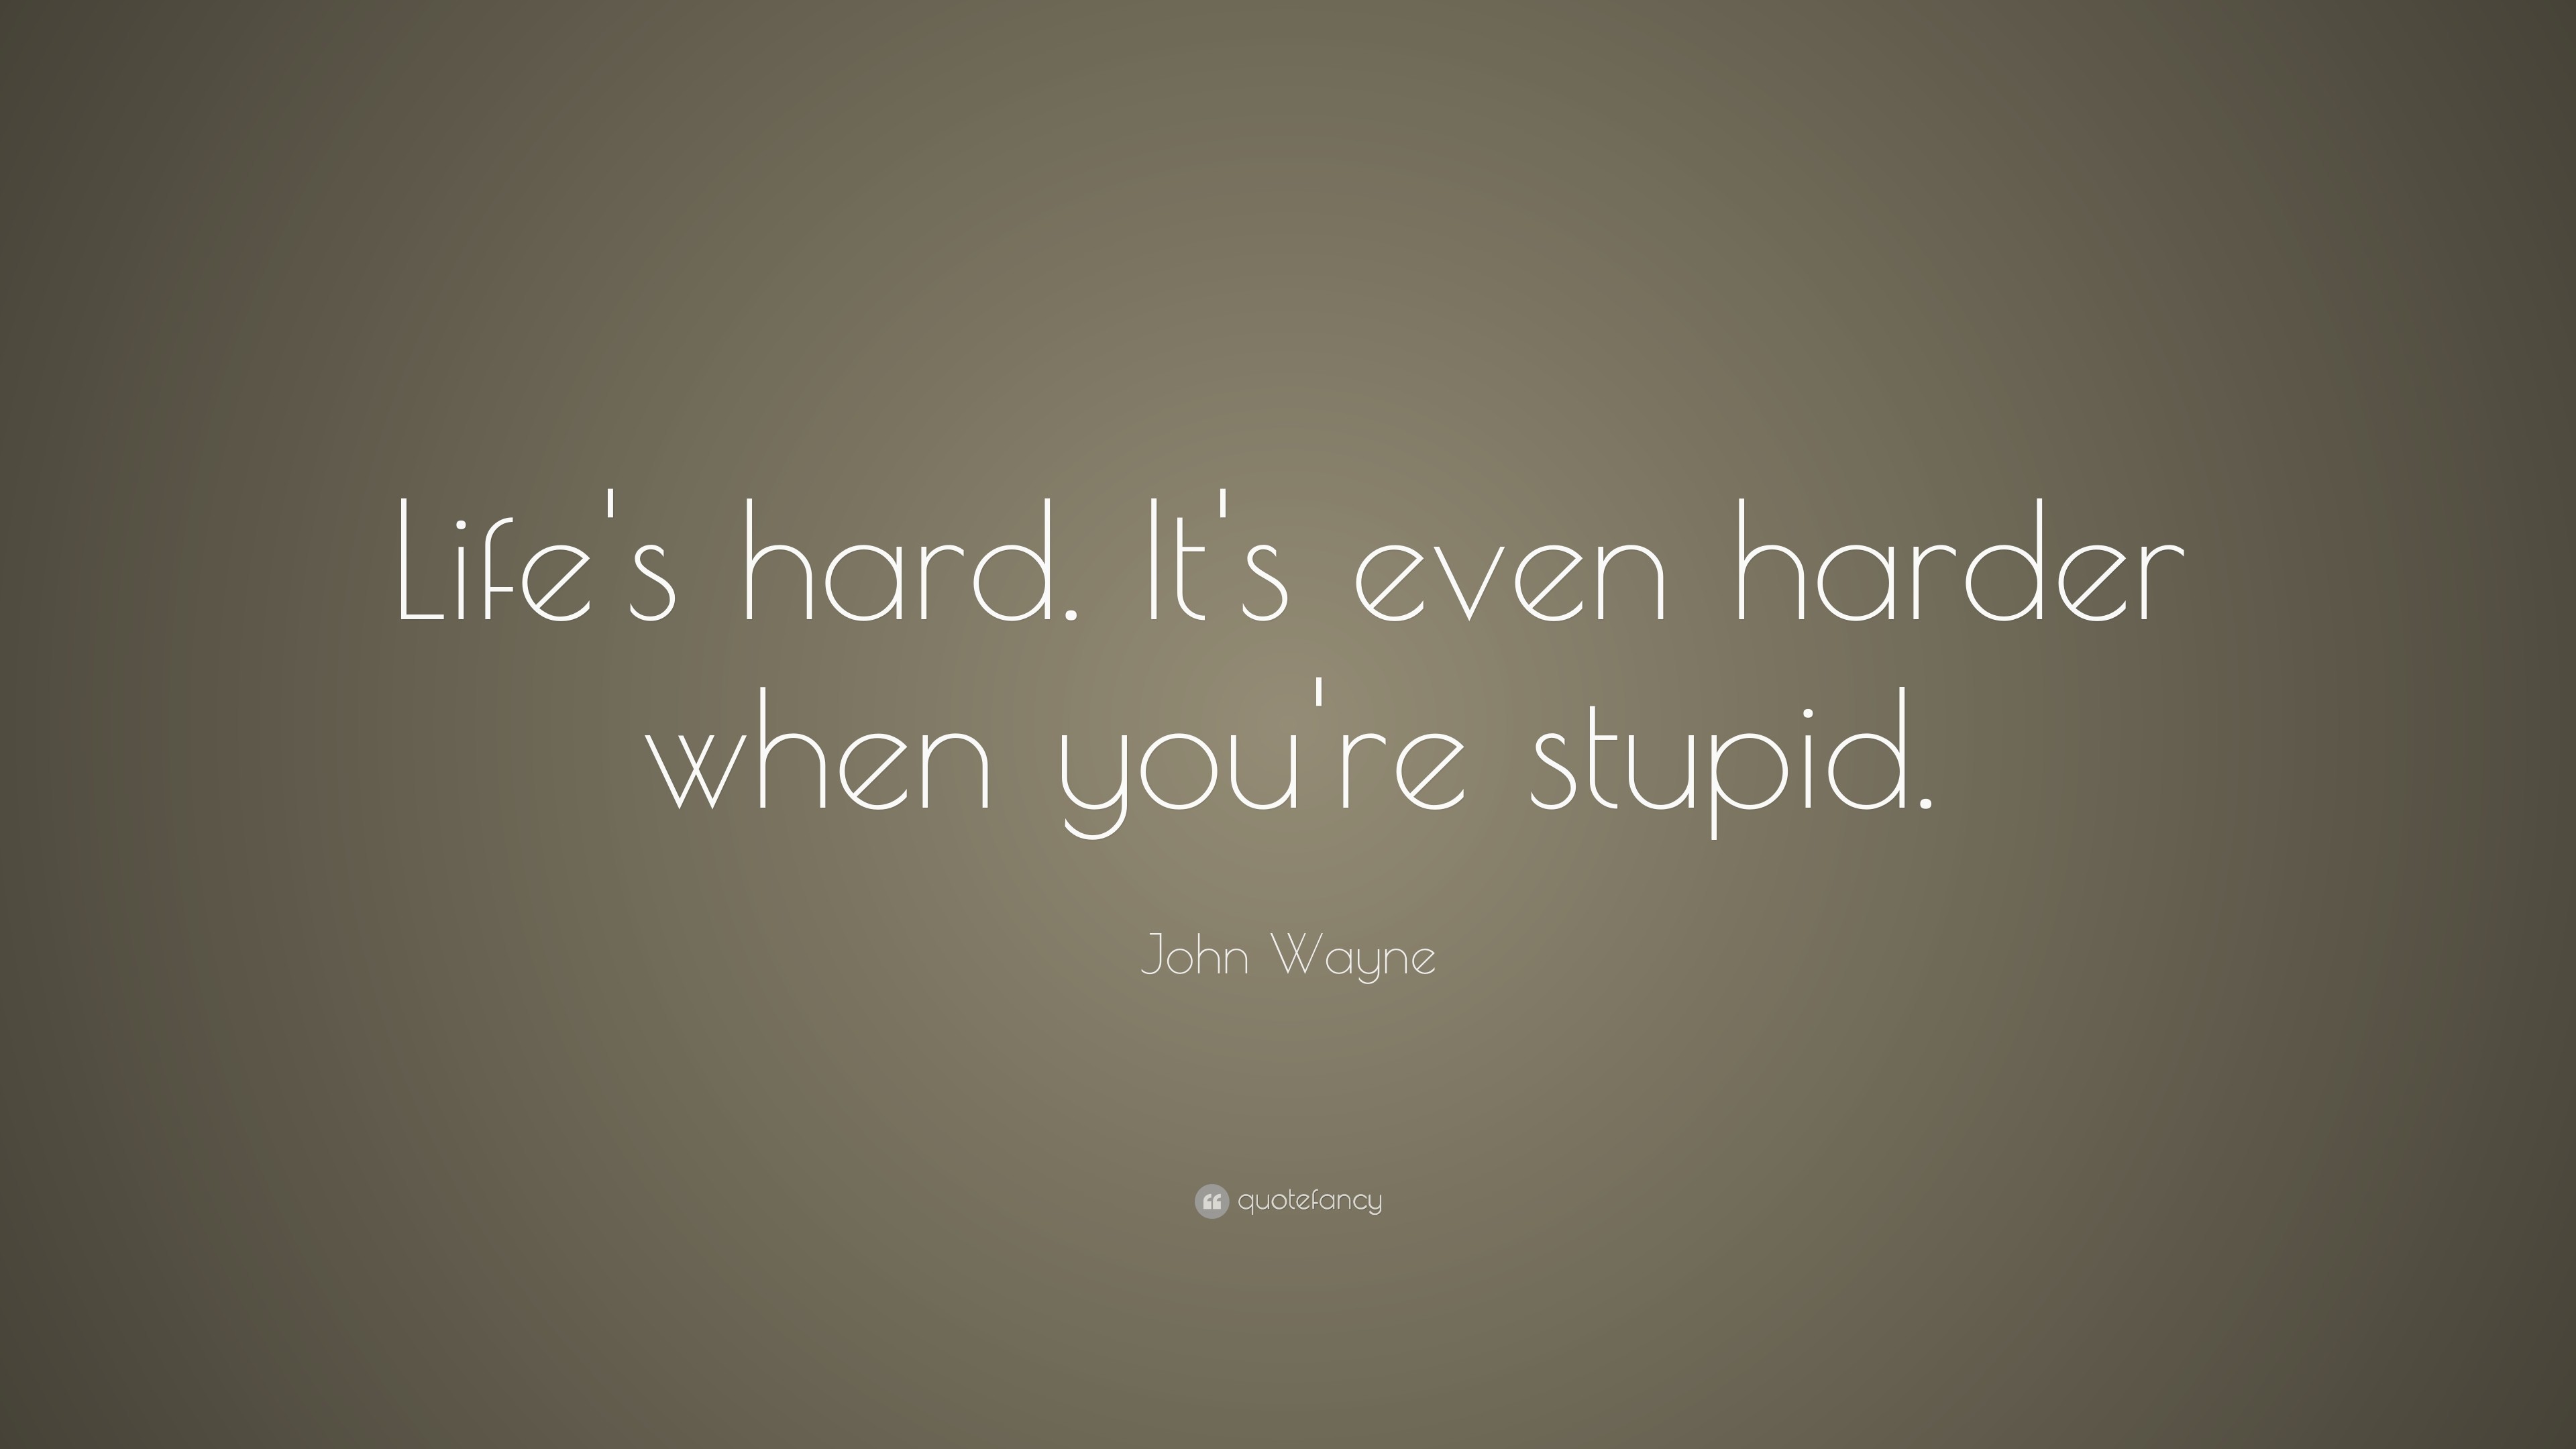 3840x2160 15 wallpapers. John Wayne Quote: “Life's hard. It's even harder when you're  stupid